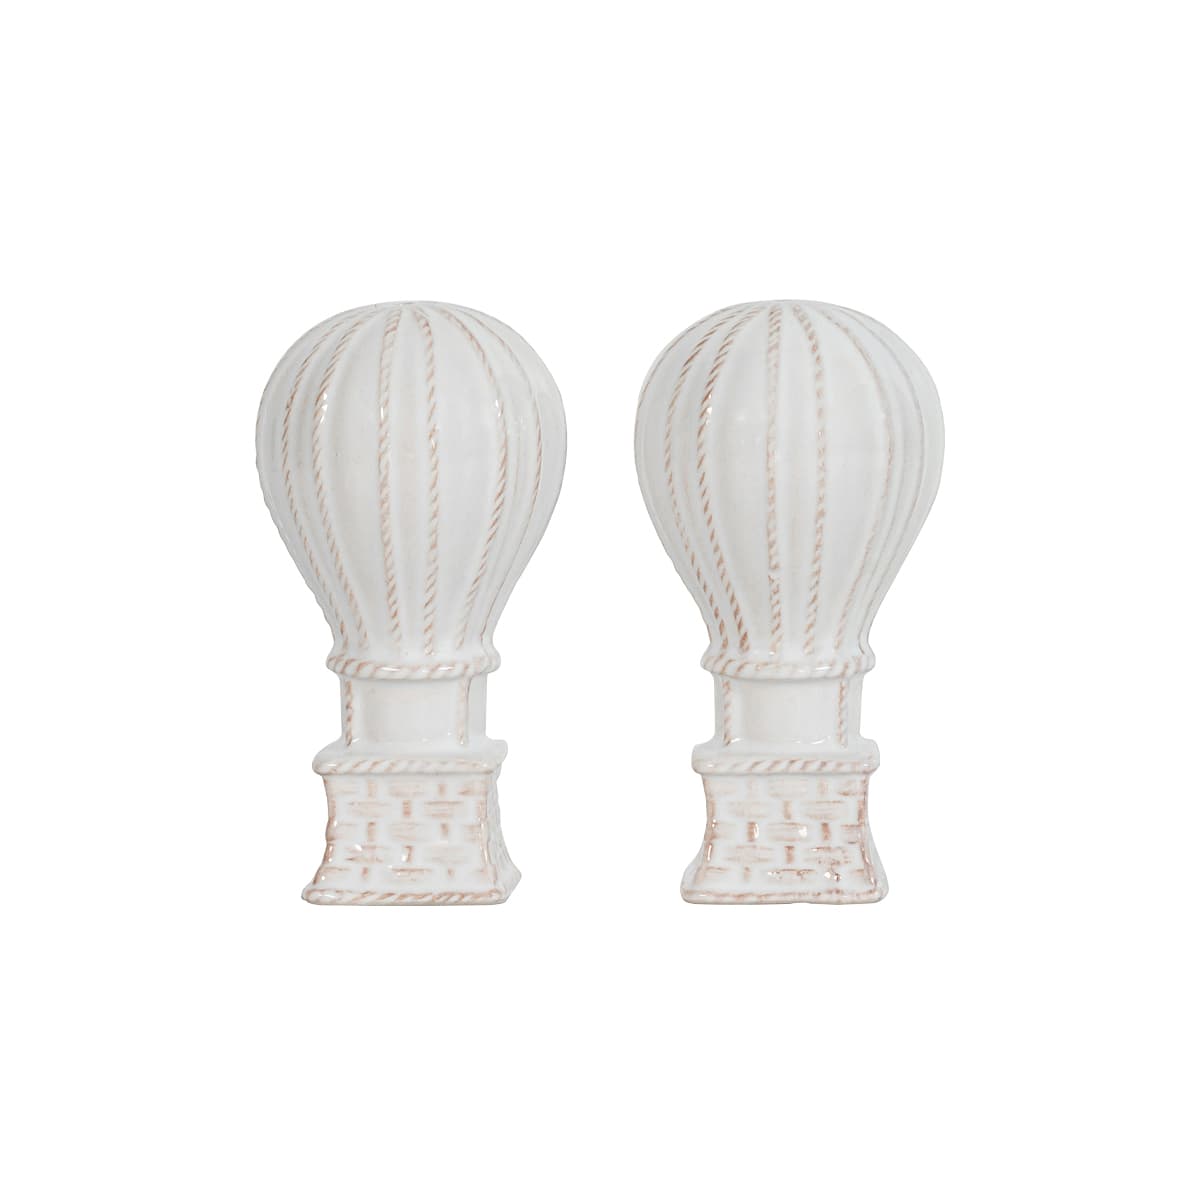 This irresistible pair of hot air balloon salt and pepper shakers are sculptural little statement pieces in their own right, delivering a sense of whimsy and adventure to the table. Packaged in our signature Juliska gift box, it makes a heavenly present for any entertaining enthusiast.